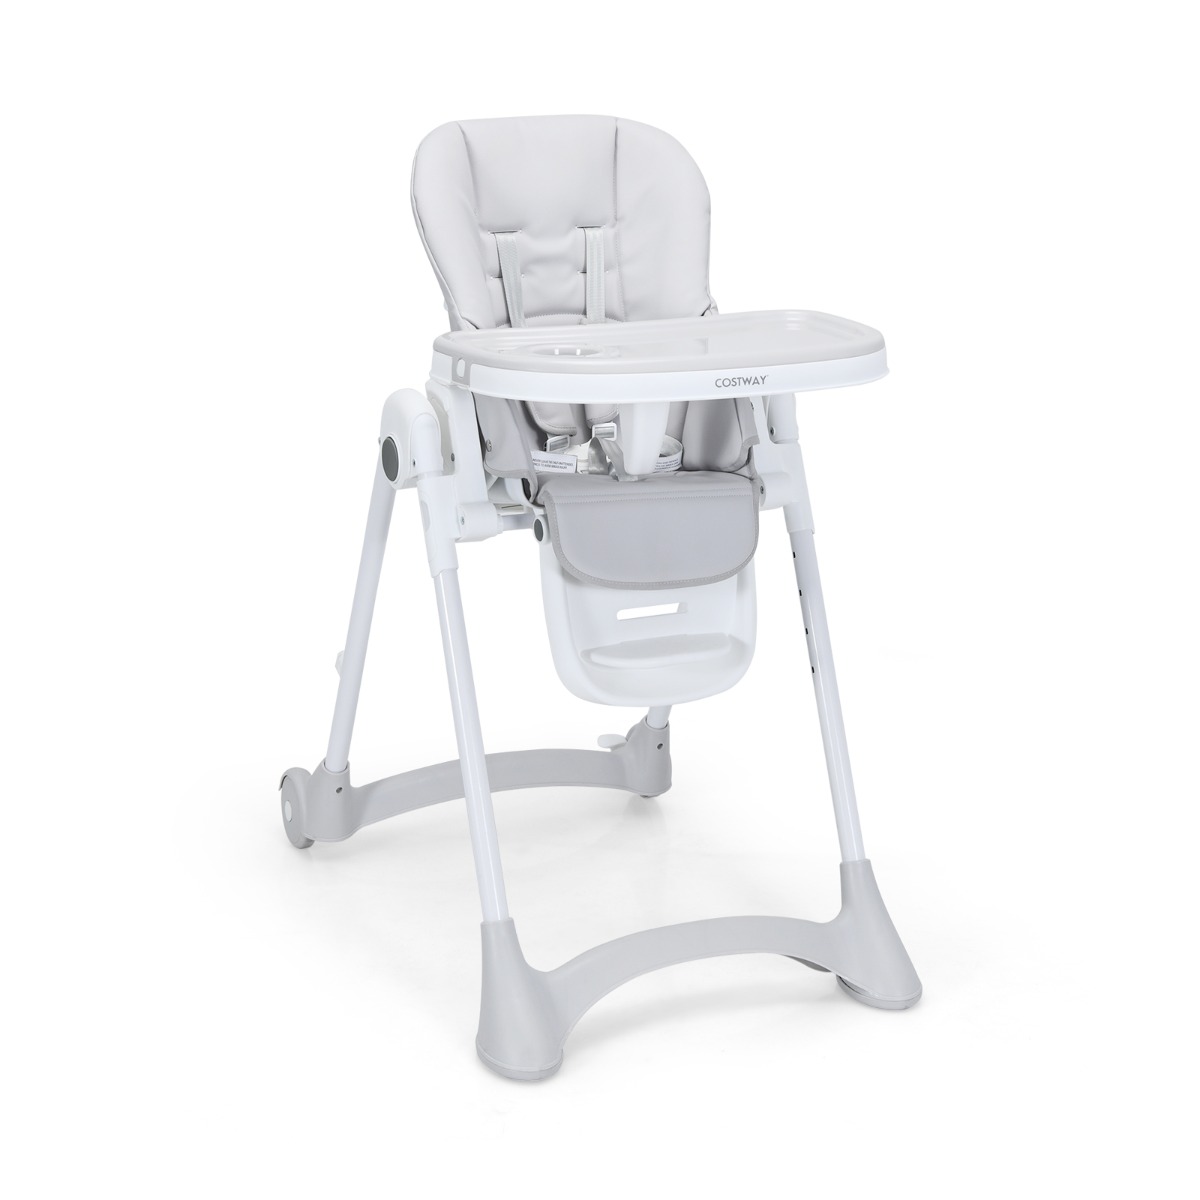 Height Adjustable Folding Highchair for Baby Toddler-Grey